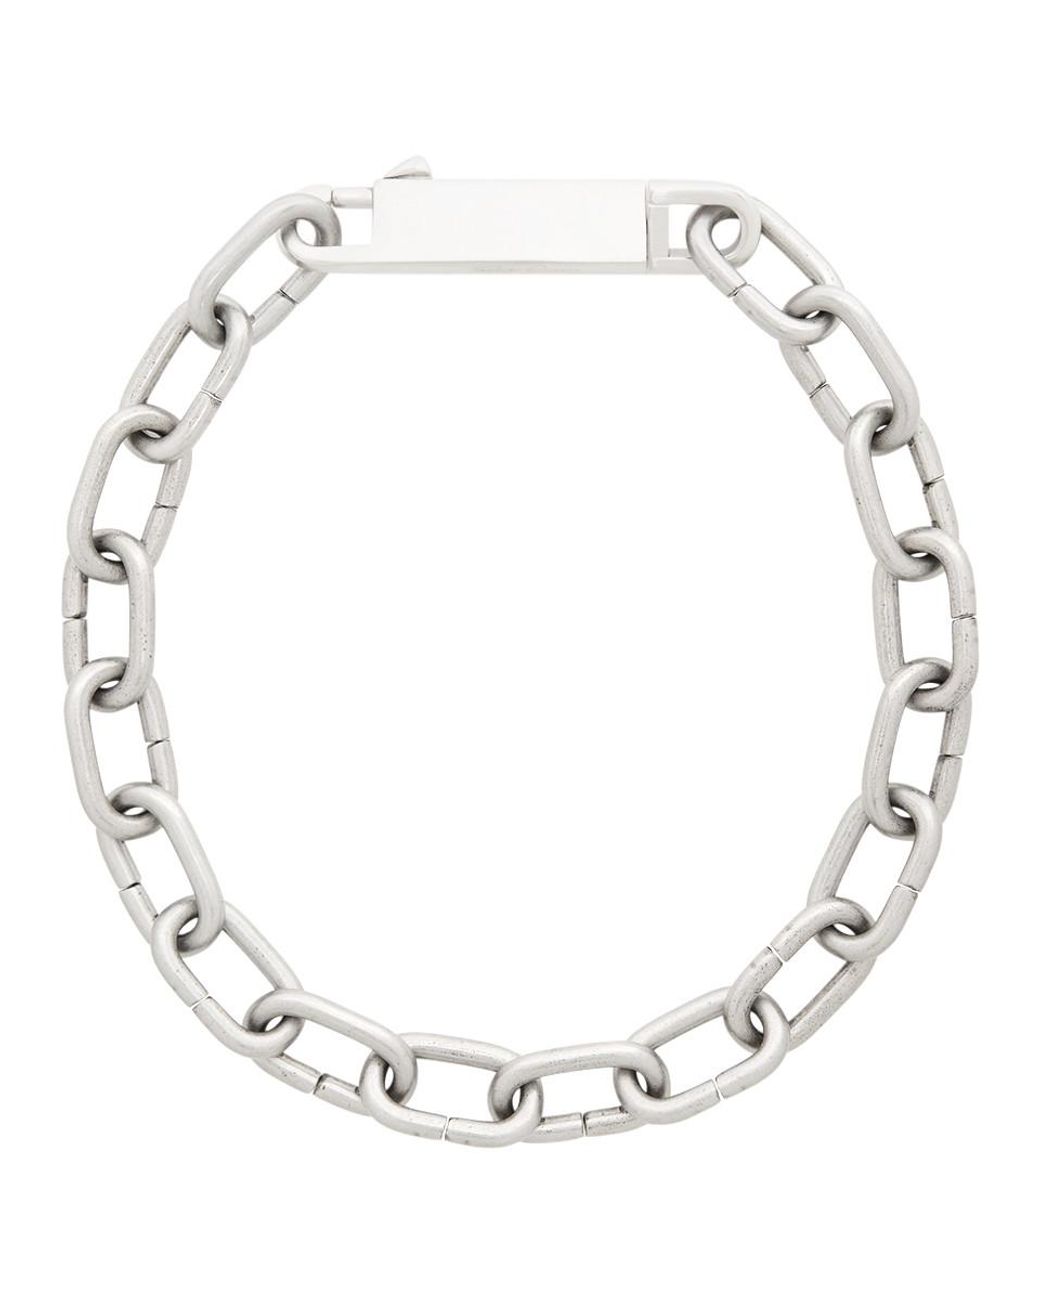 Rick Owens Silver Easy Choker Necklace in Metallic for Men | Lyst